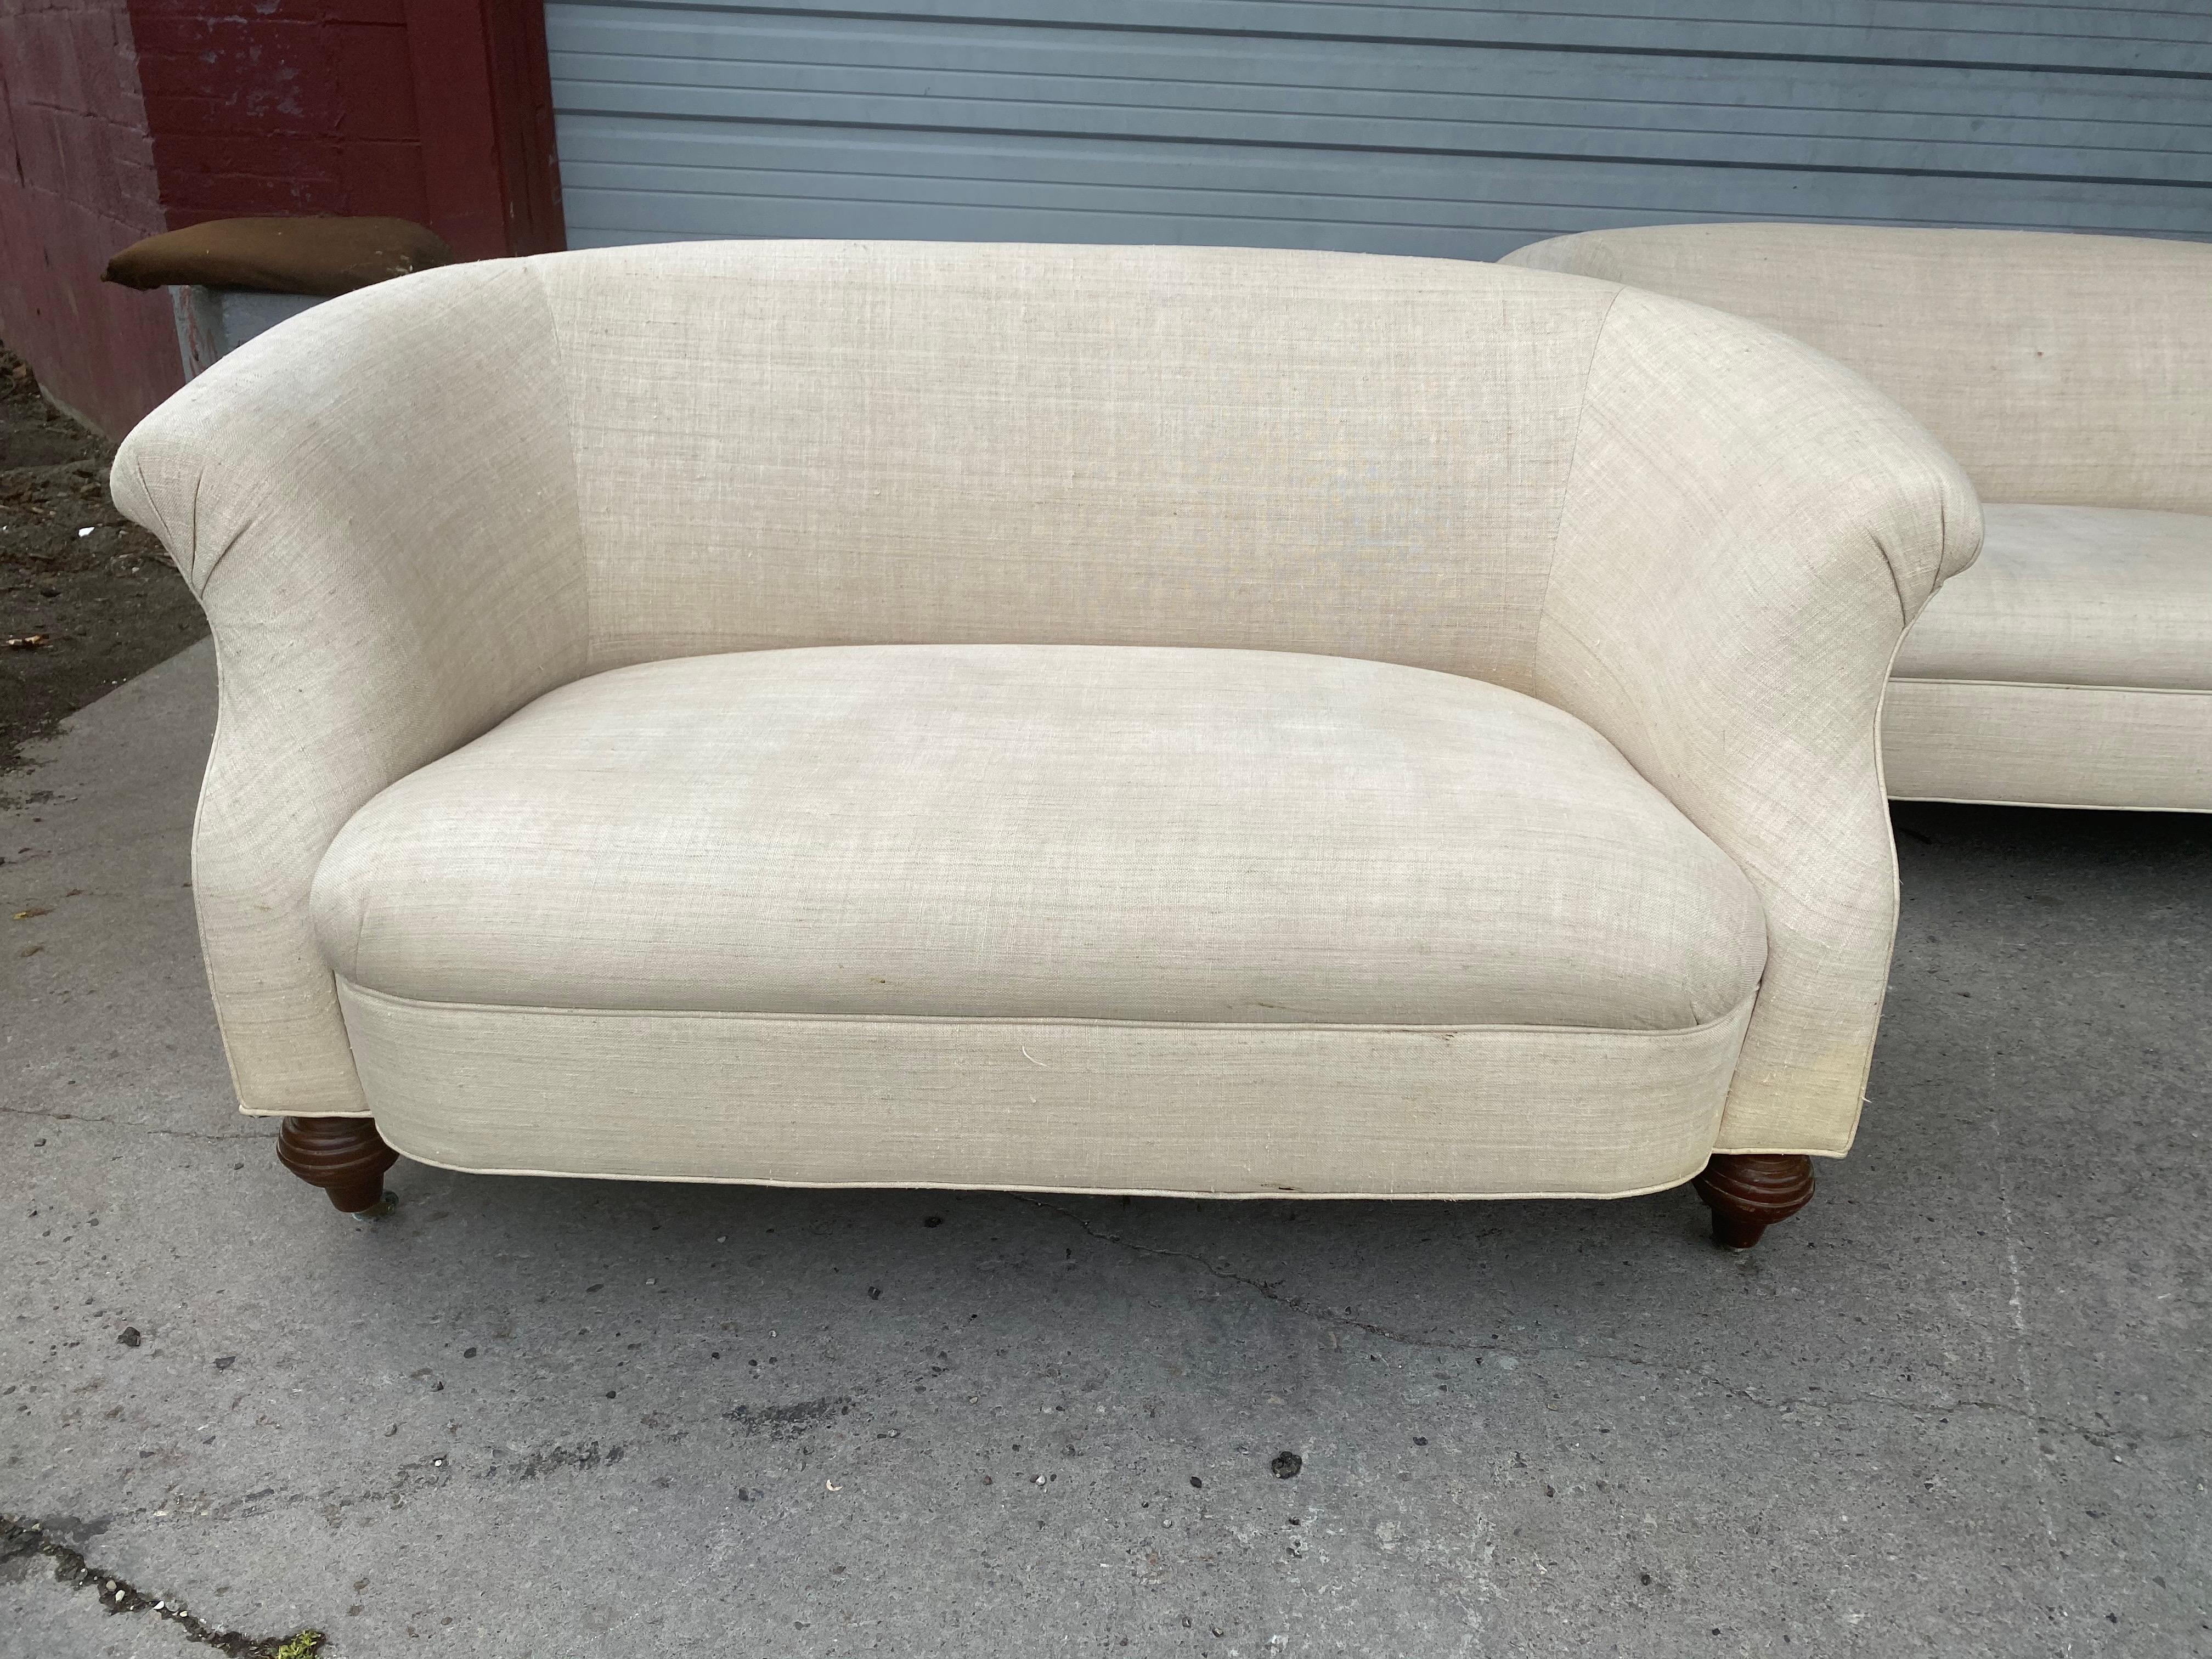 Mid-20th Century Wonderful Matched Pair of Victorian Style Sette's, Loveseats, circa 1930s